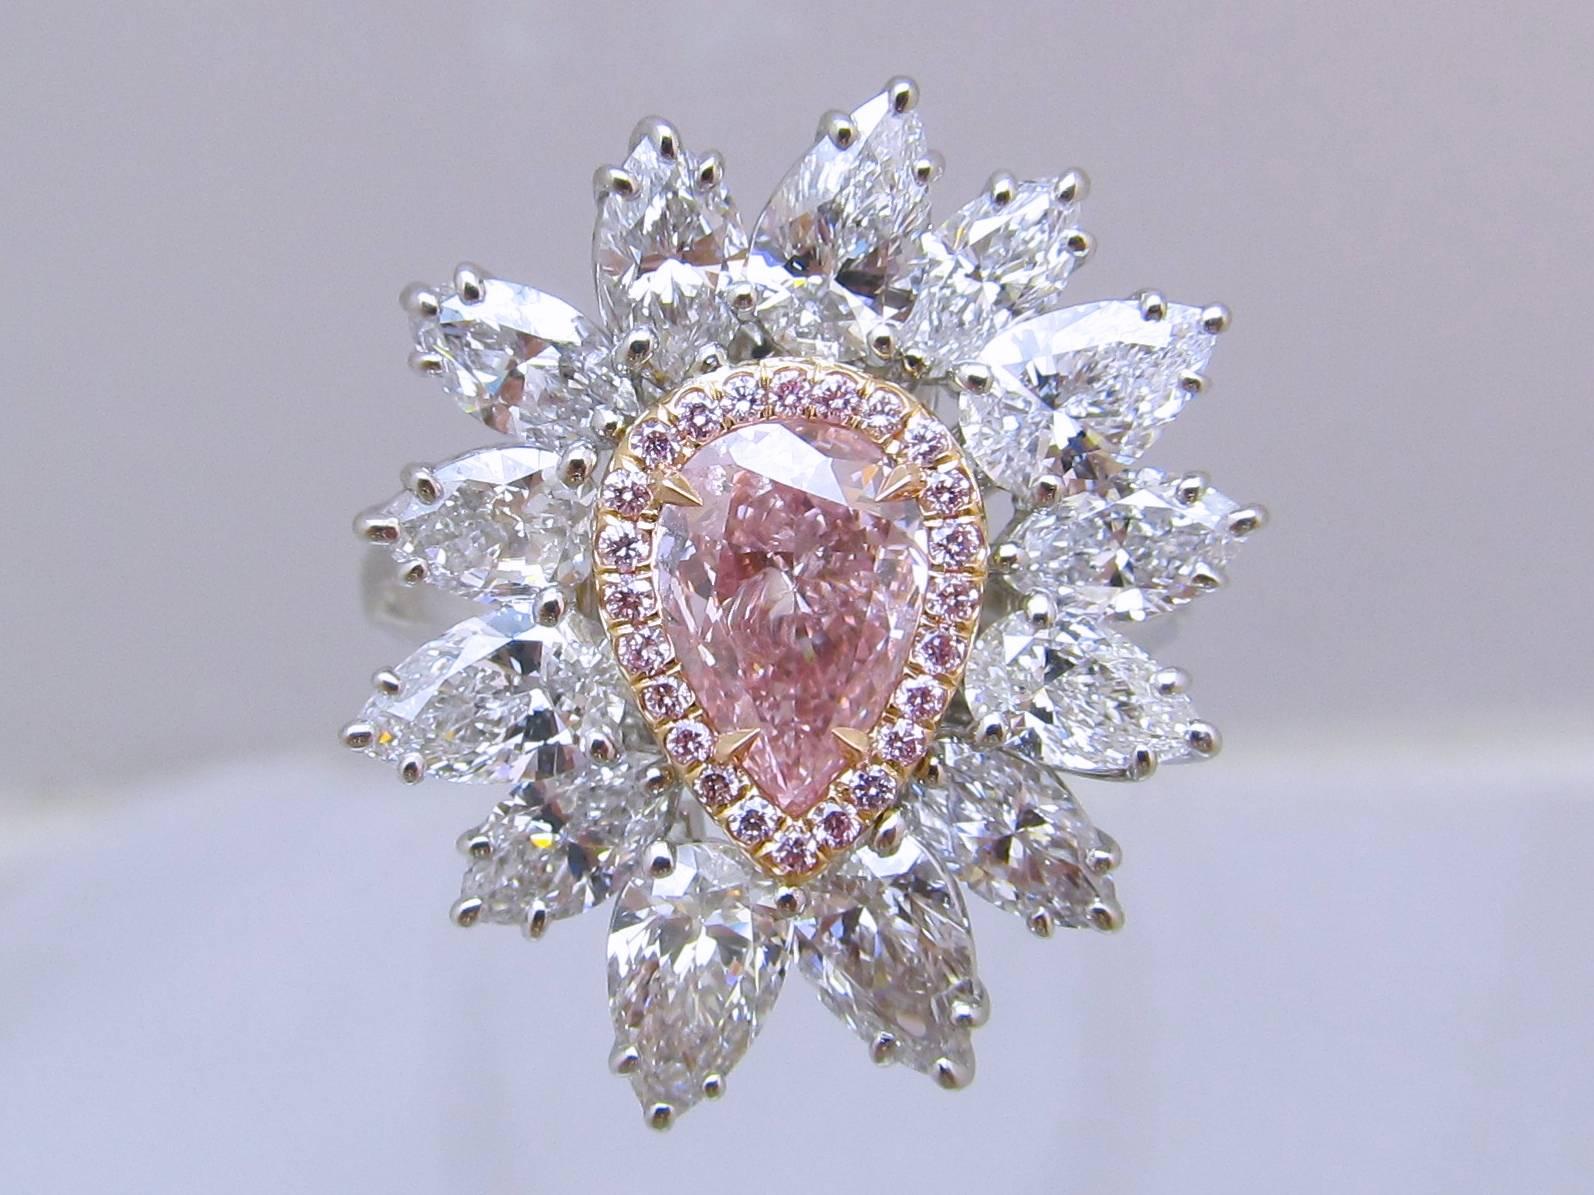 Nature's Wonder! Beautiful Intense Purplish Pink pear shape diamond is set in rose gold surrounded with 24 natural pink brilliant diamonds( total weight of 0.13 carats) then flared flower petals style with 13 top color pear shape diamonds ( total